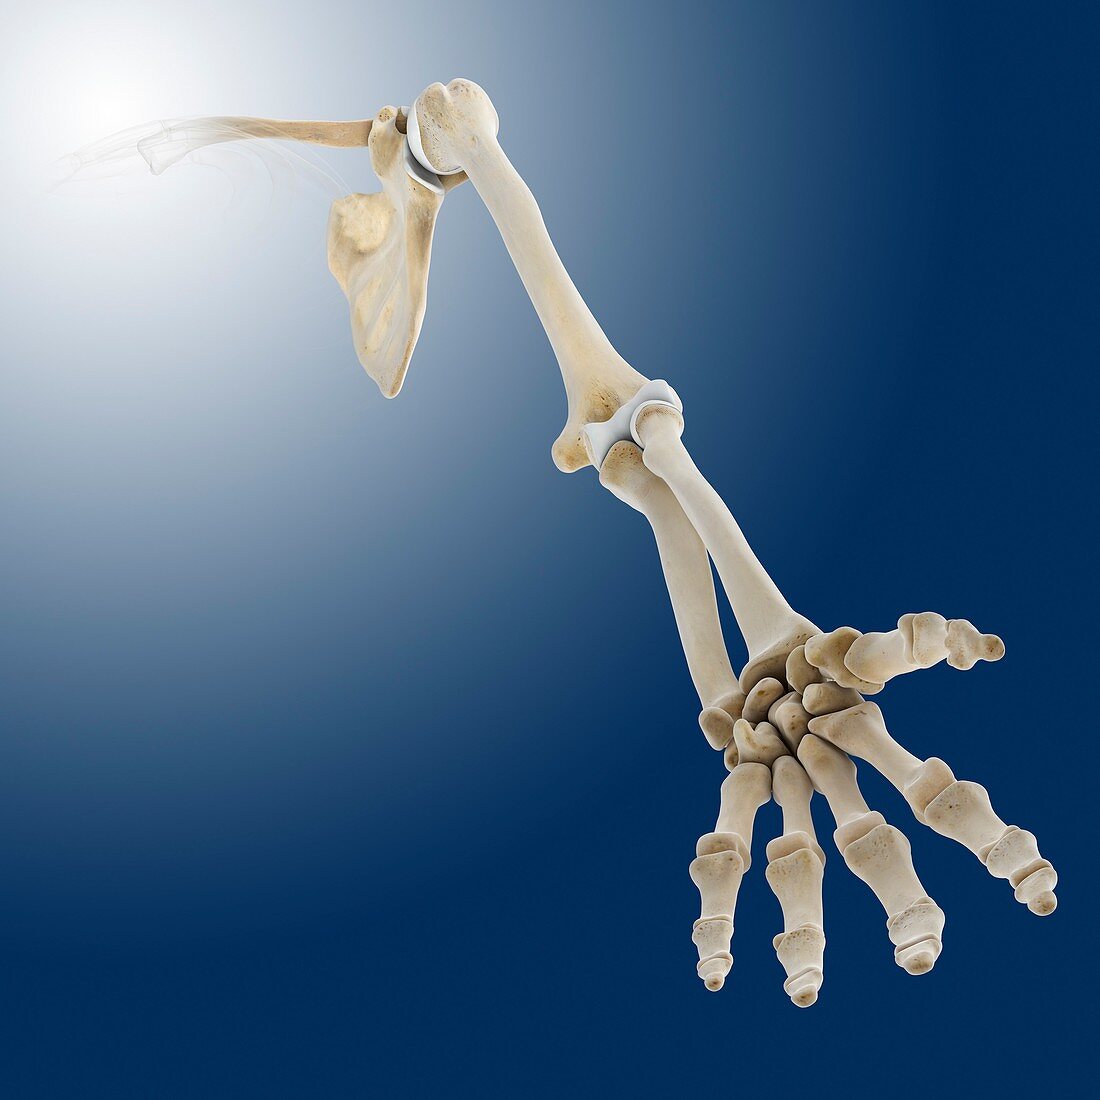 Arm bones and joints,artwork